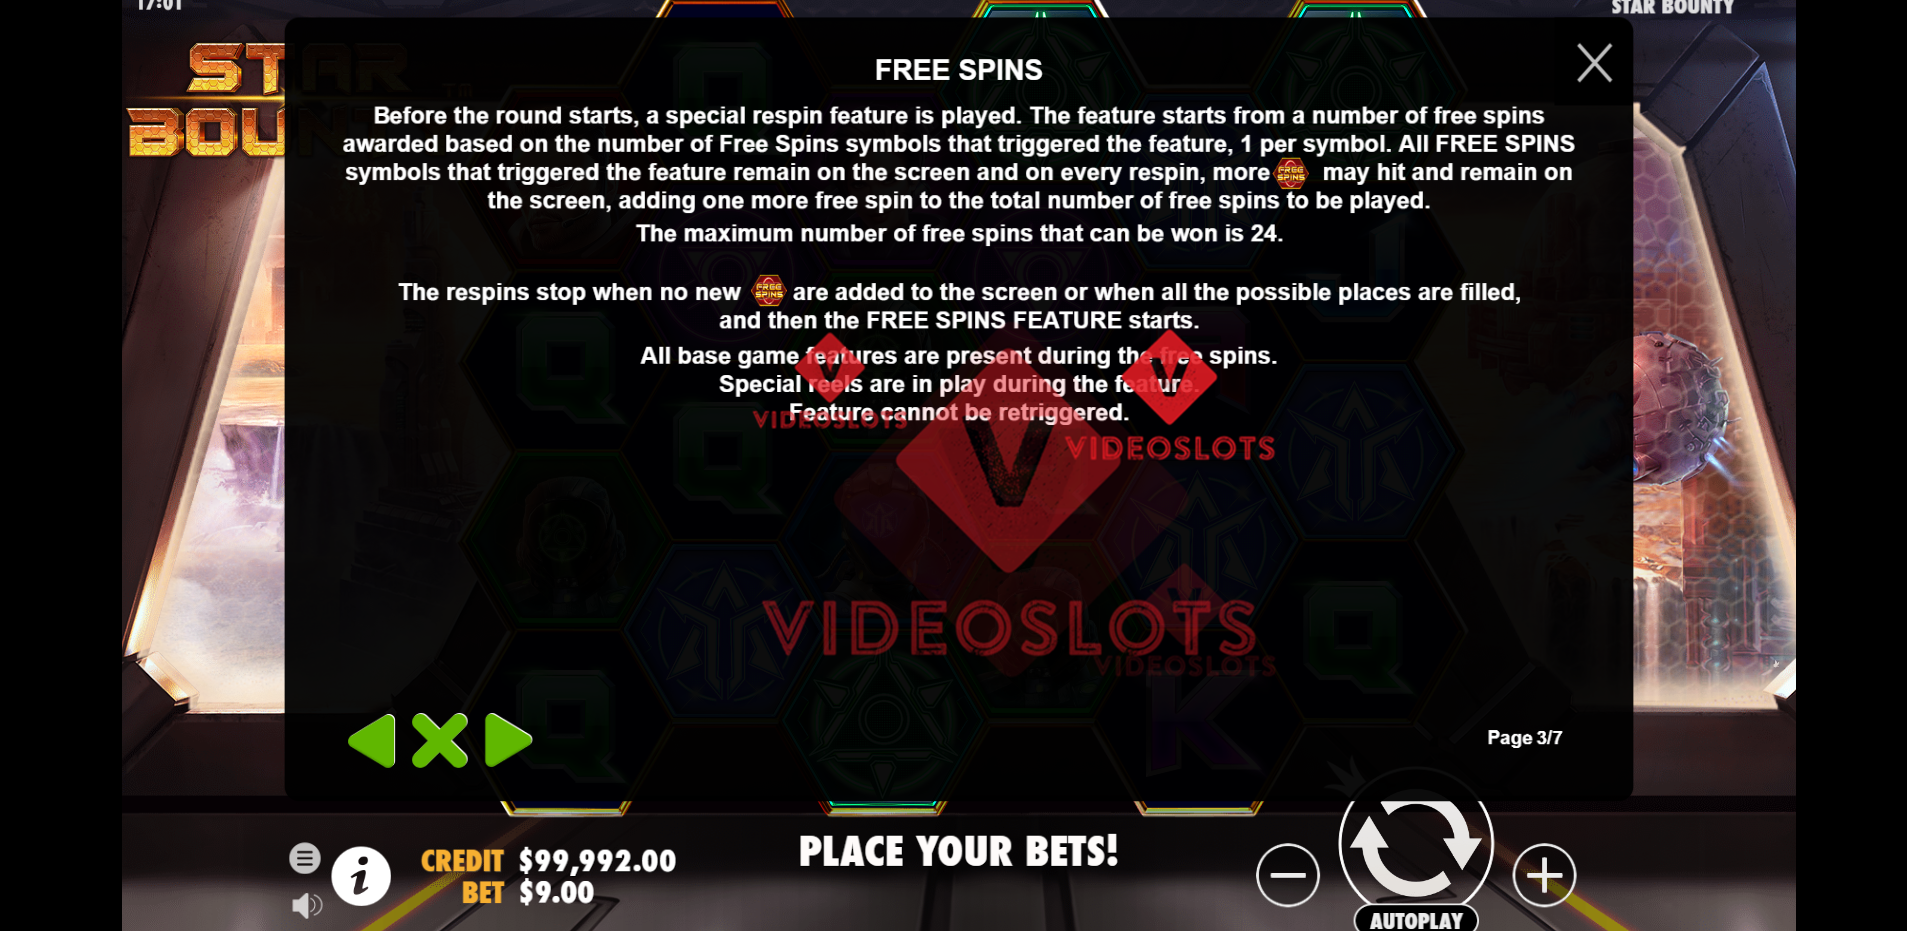 Game Rules for Star Bounty slot by Pragmatic Play